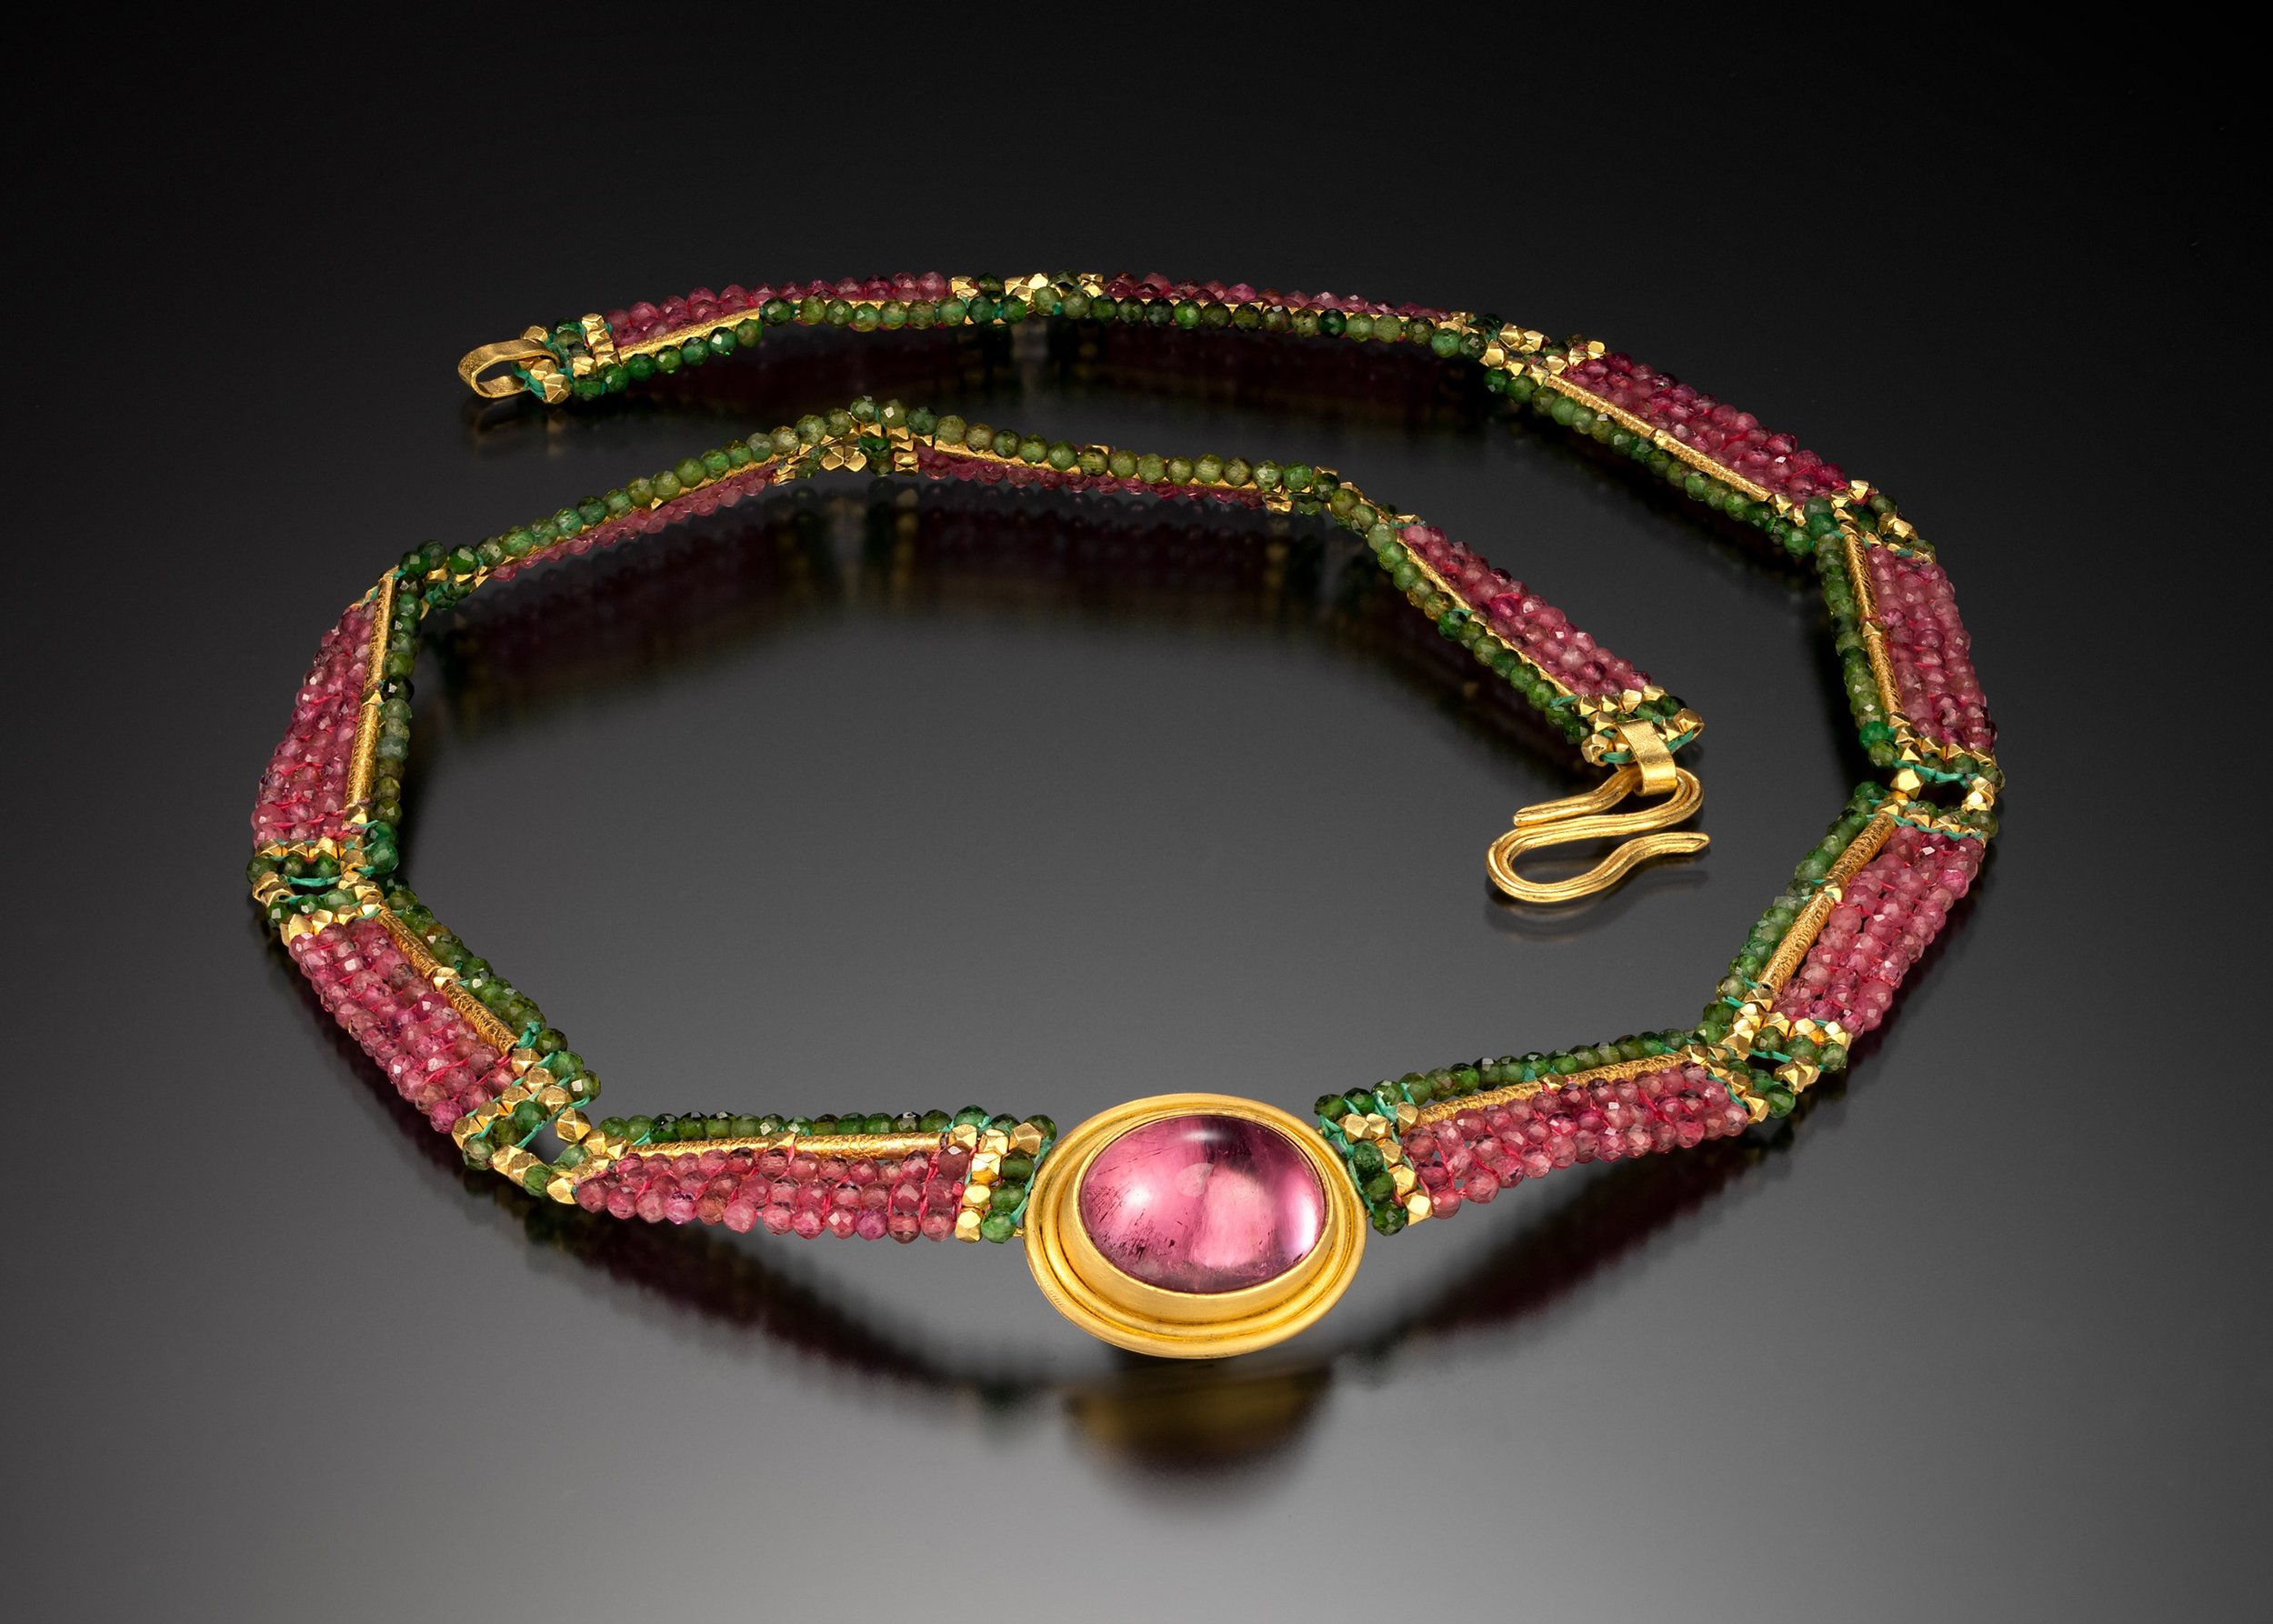 Watermelon Tourmaline. Hand woven of pink and green tourmaline beads, and combined with 18k gold tubes. The bezel and clasp are hand fabricated from 22K gold and set with a bright pink tourmaline.